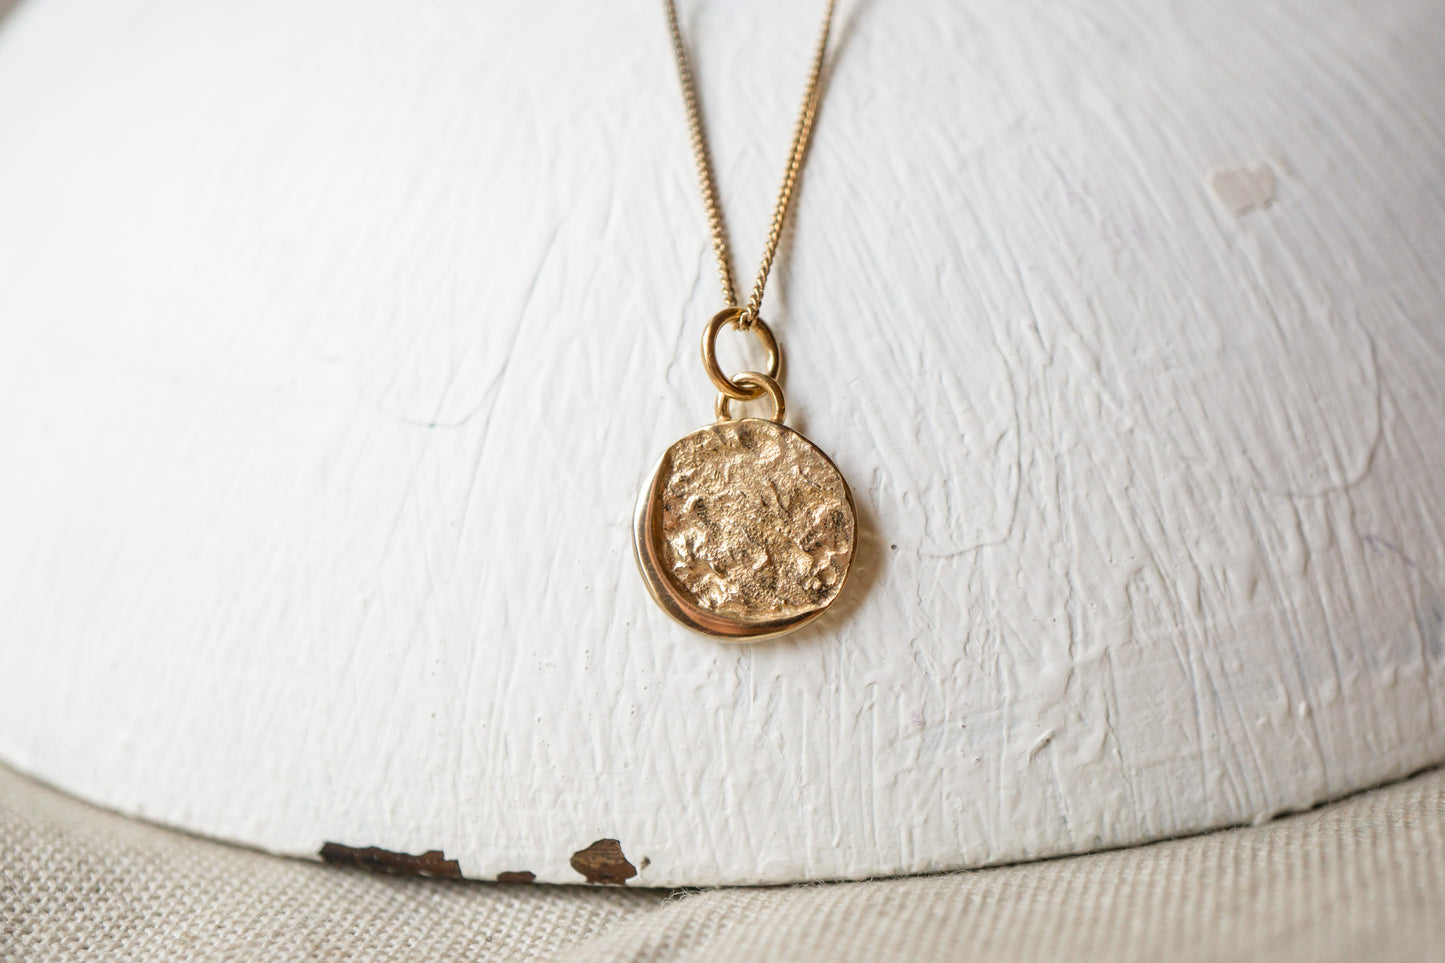 Luna necklace -gold plated